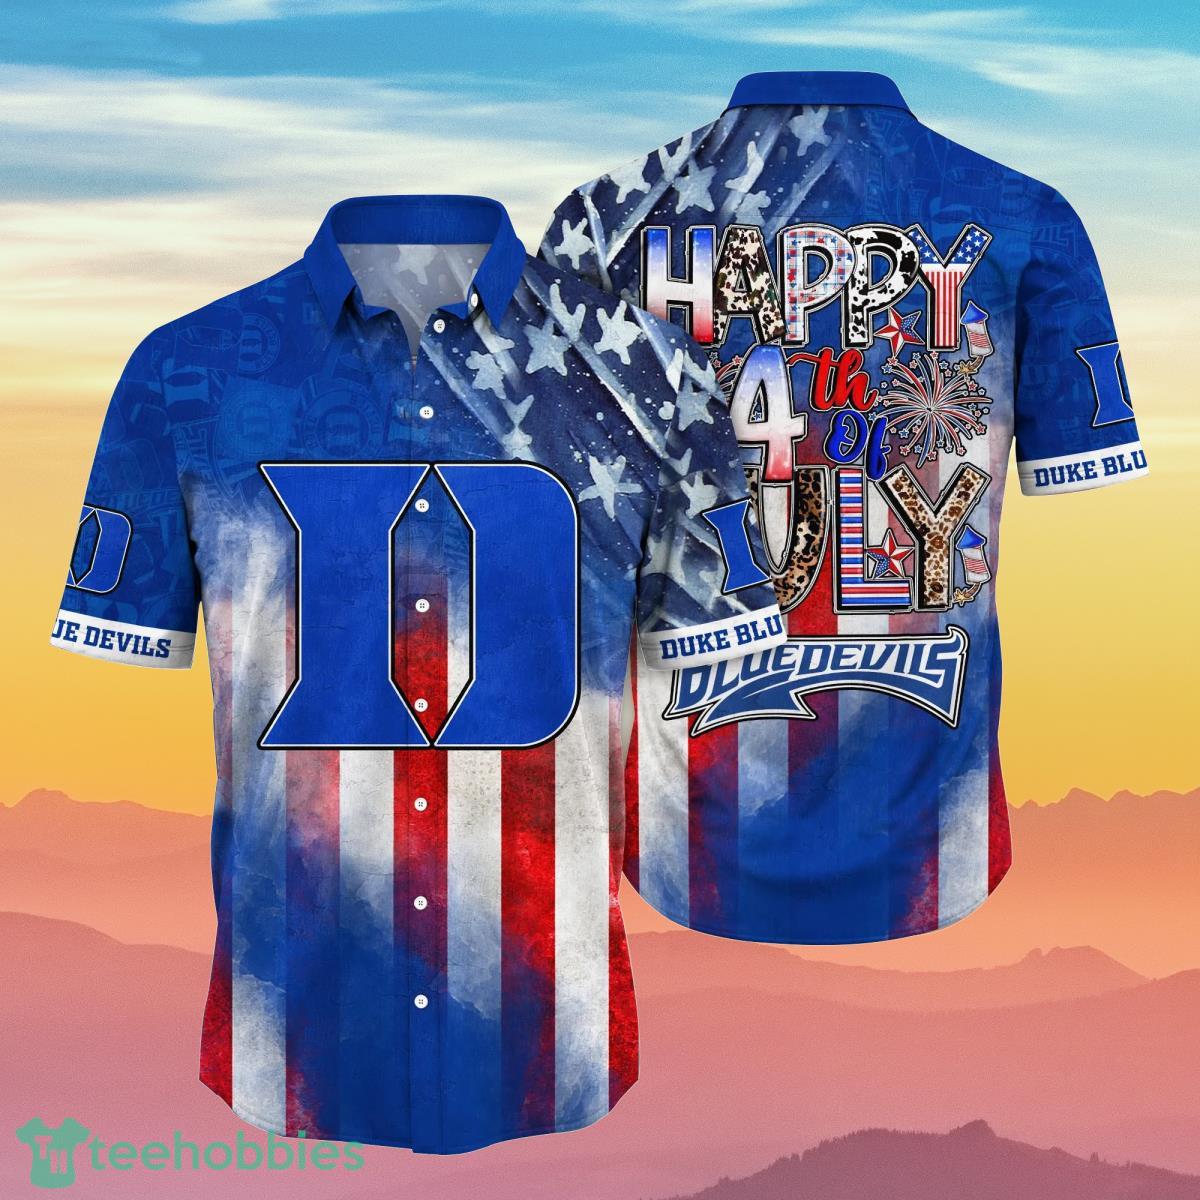 Duke Blue Devils NCAA2 Hawaiian Shirt 4th Of July Independence Day Best Gift For Men And Women Fans - Duke Blue Devils NCAA2 Hawaii Shirt Independence Day, Summer Shirts NA49897_1